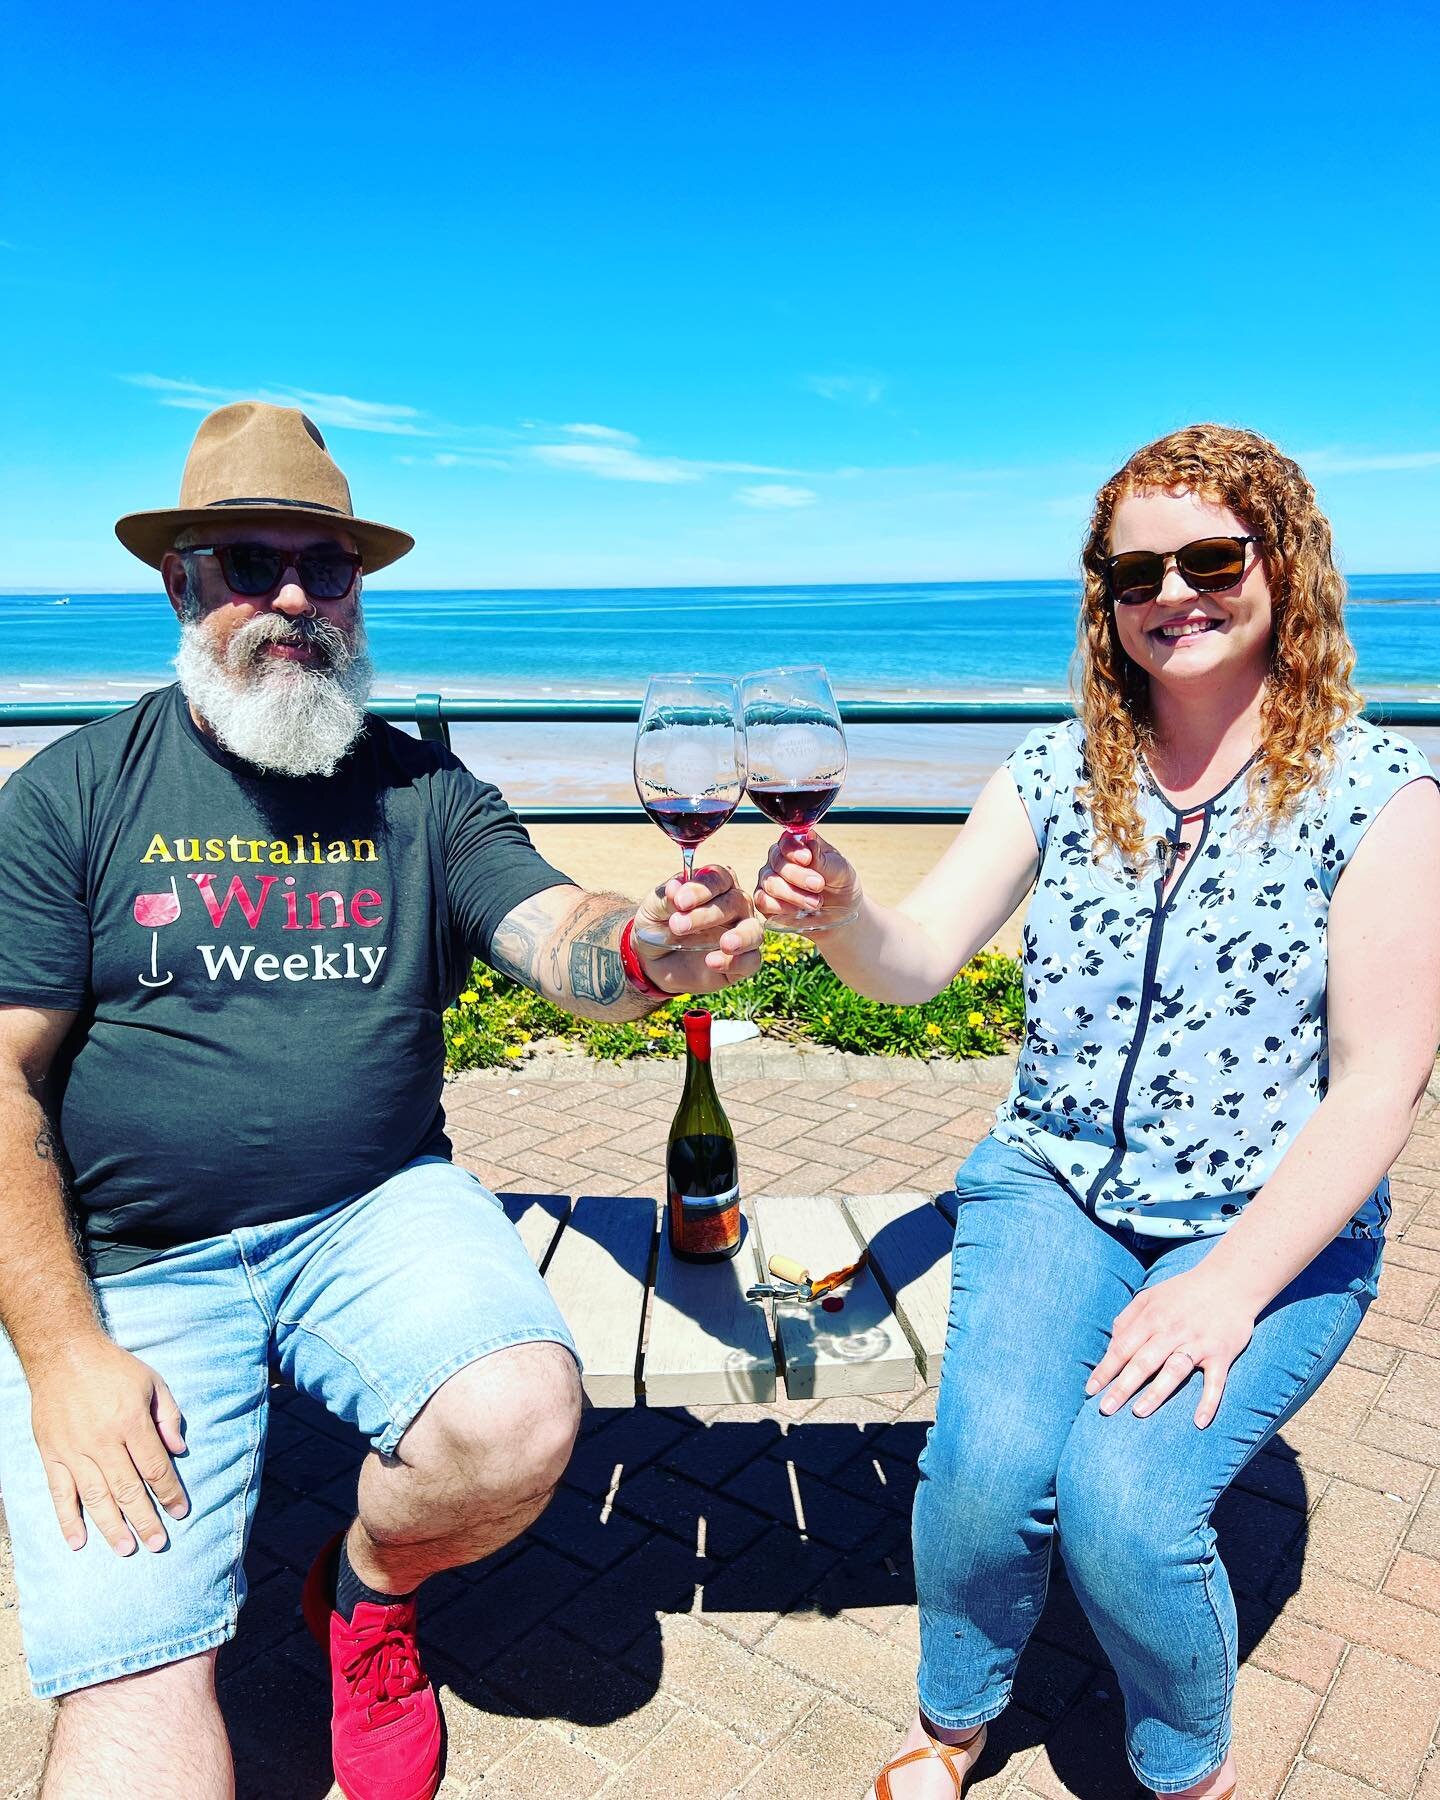 A few more lovely photos of a  #theroswines tasting for #australianwineweekly with Nathan near the beach 🏖🍷 #adelaidehillsros&eacute; #grenachemataro #semillonmuscat #winetastingbythebeach #smallbatchwinemaking #organicallygrowngrapes